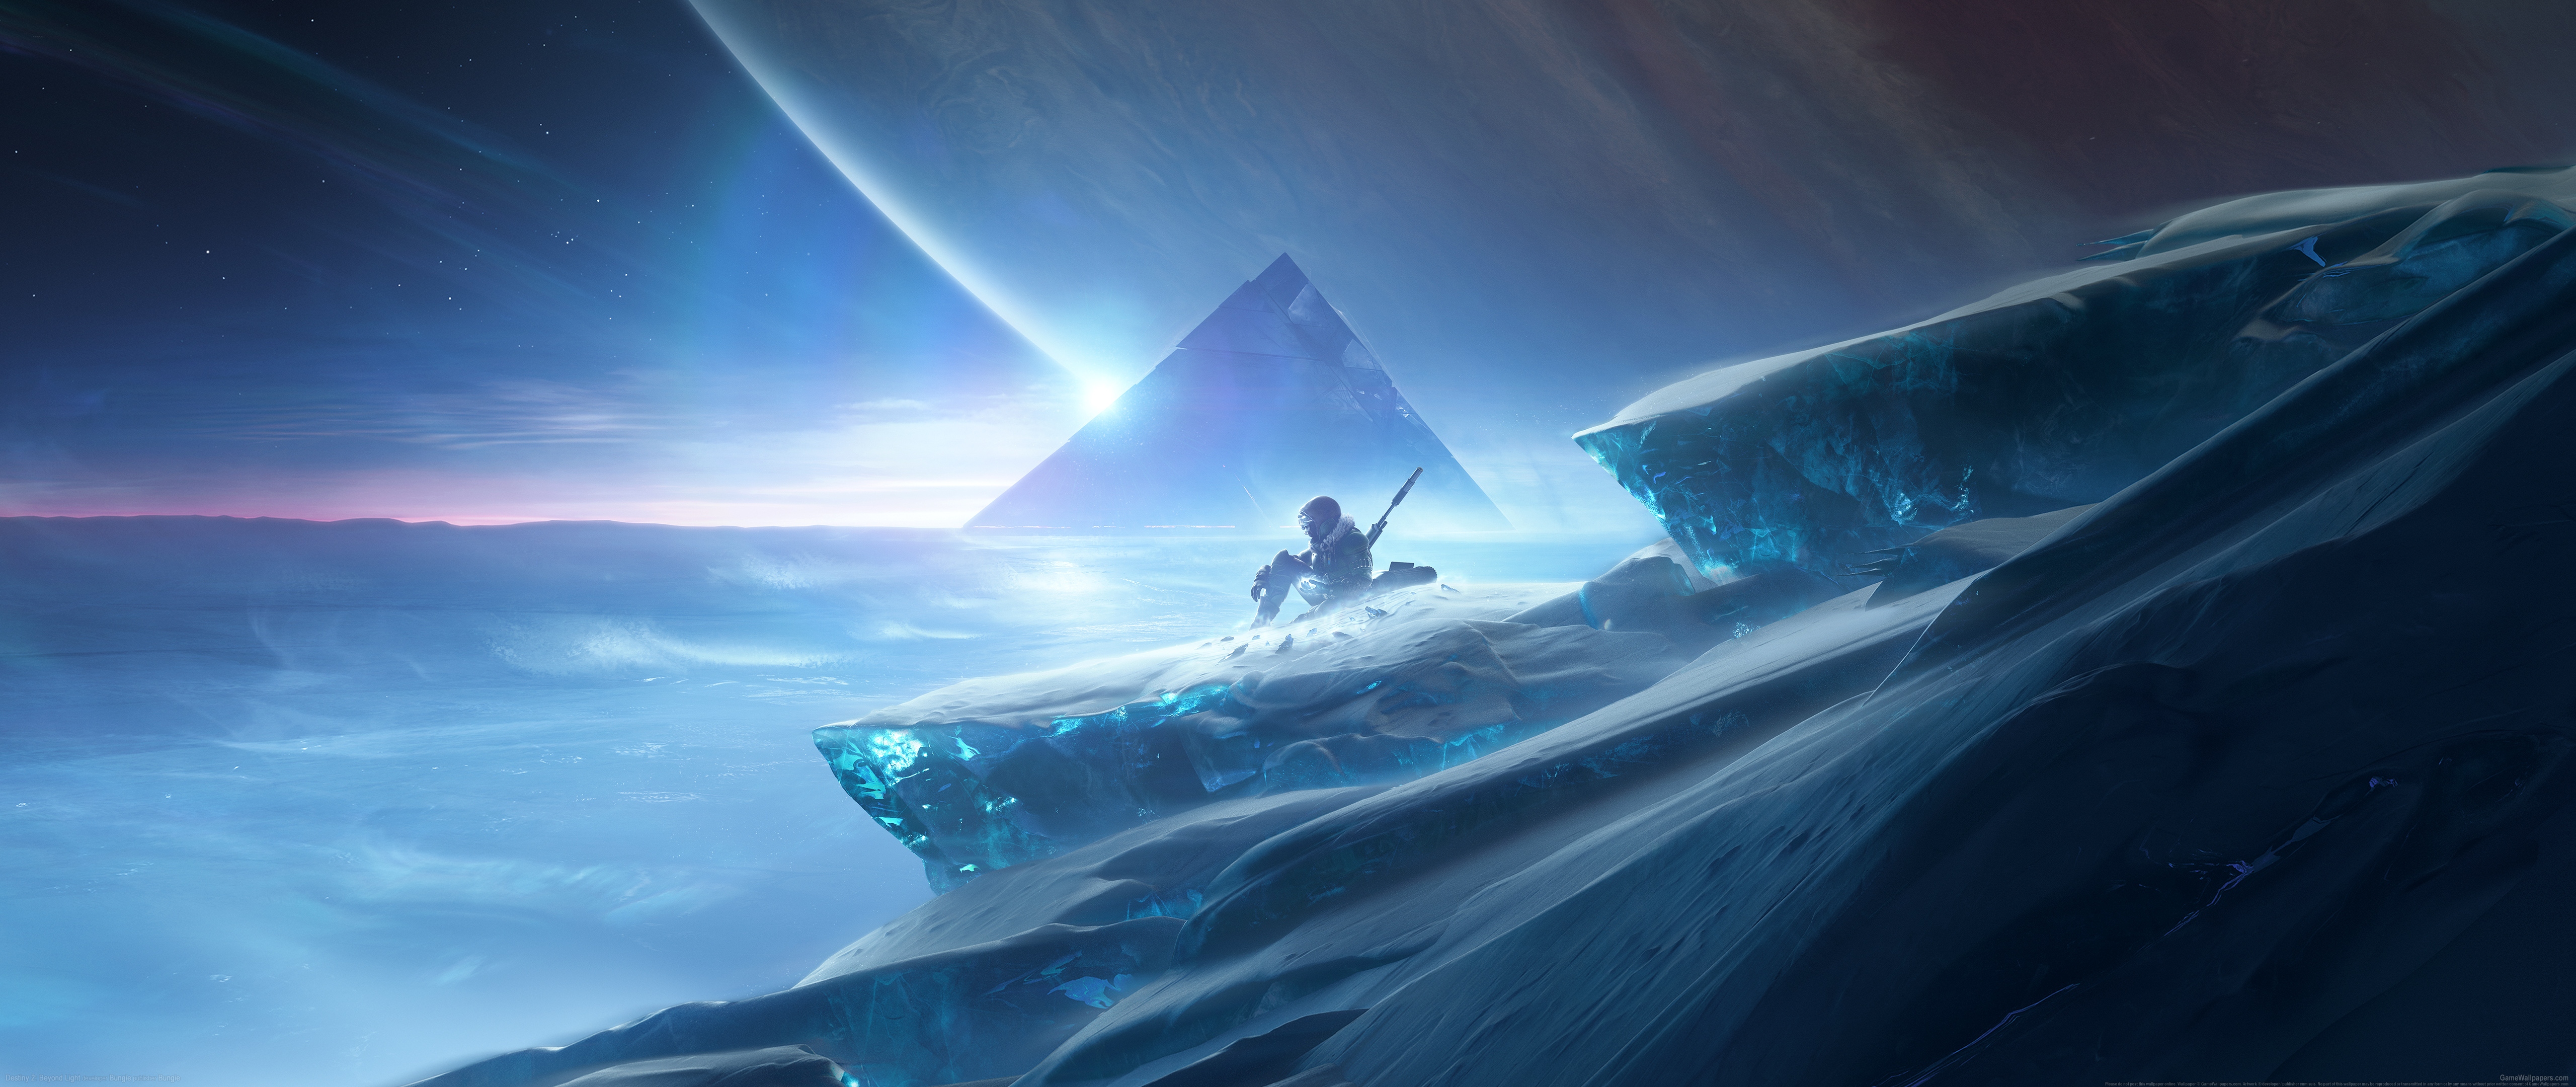 General 5120x2160 video games video game art digital art pyramid ice space planet Destiny 2 watermarked ultrawide science fiction Bungie PC gaming